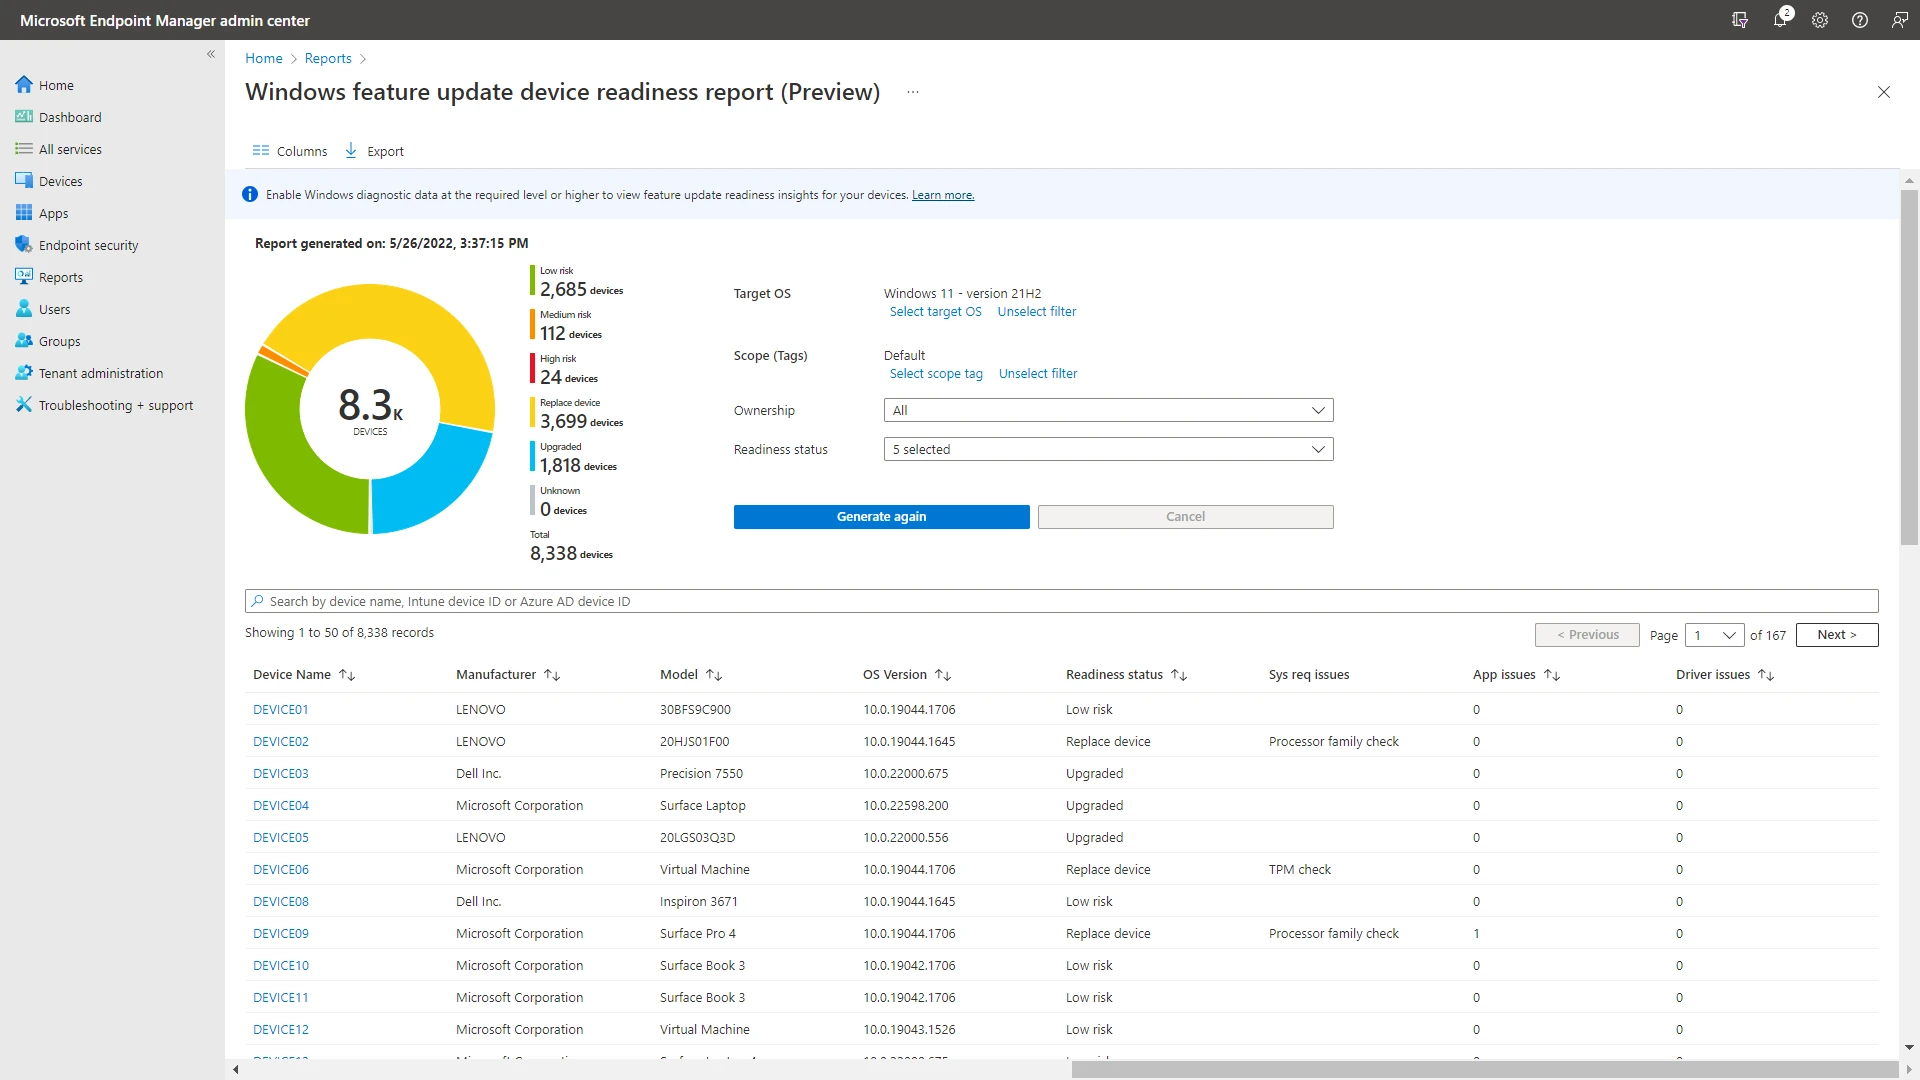 Windows feature update device readiness report in Endpoint Manager